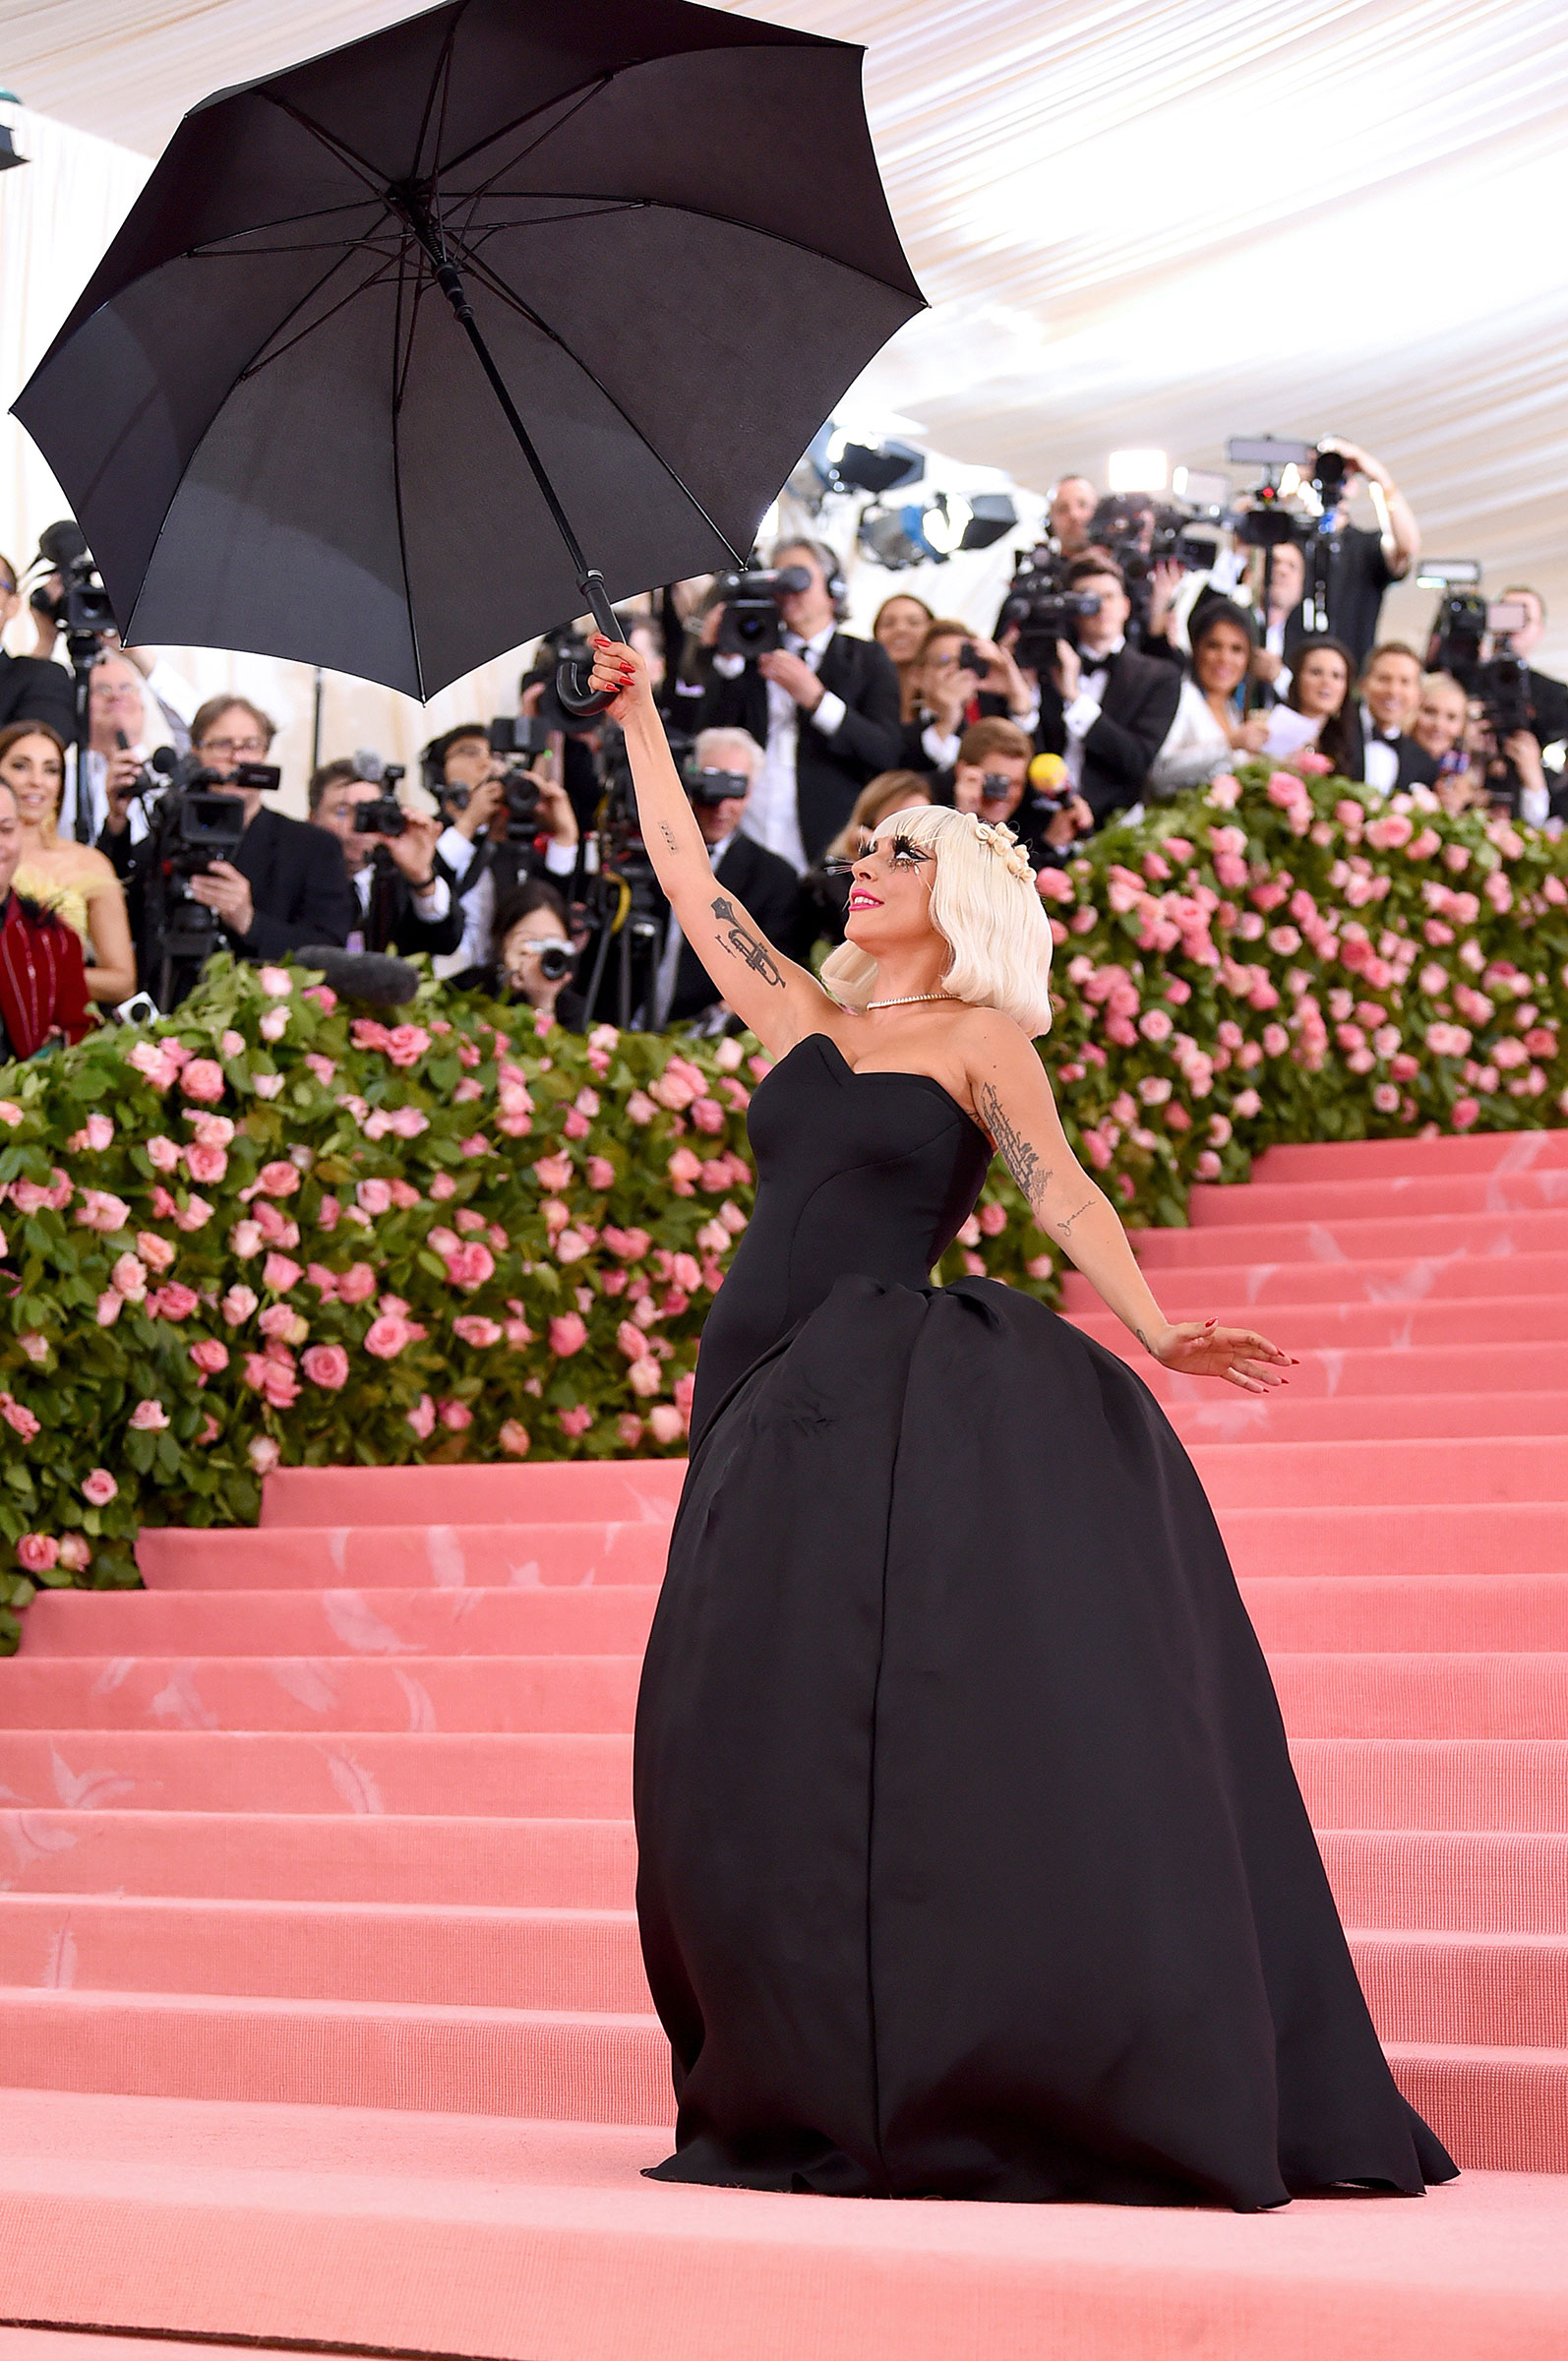 Lady Gaga Just Outdid Herself On The 2019 Met Gala Carpet | Time